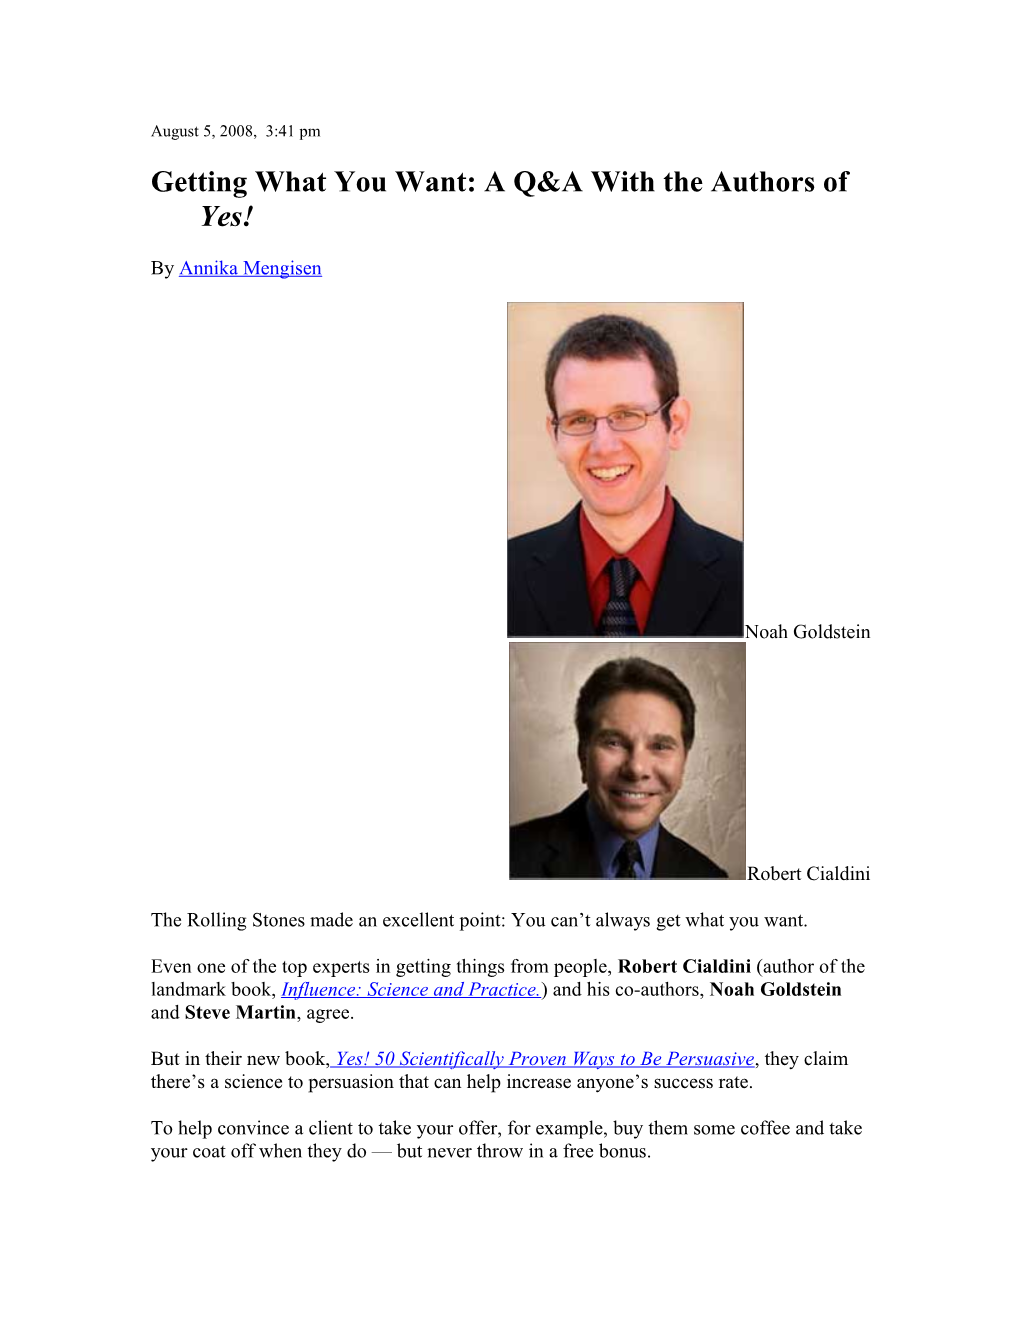 Getting What You Want: a Q&A with the Authors of Yes!